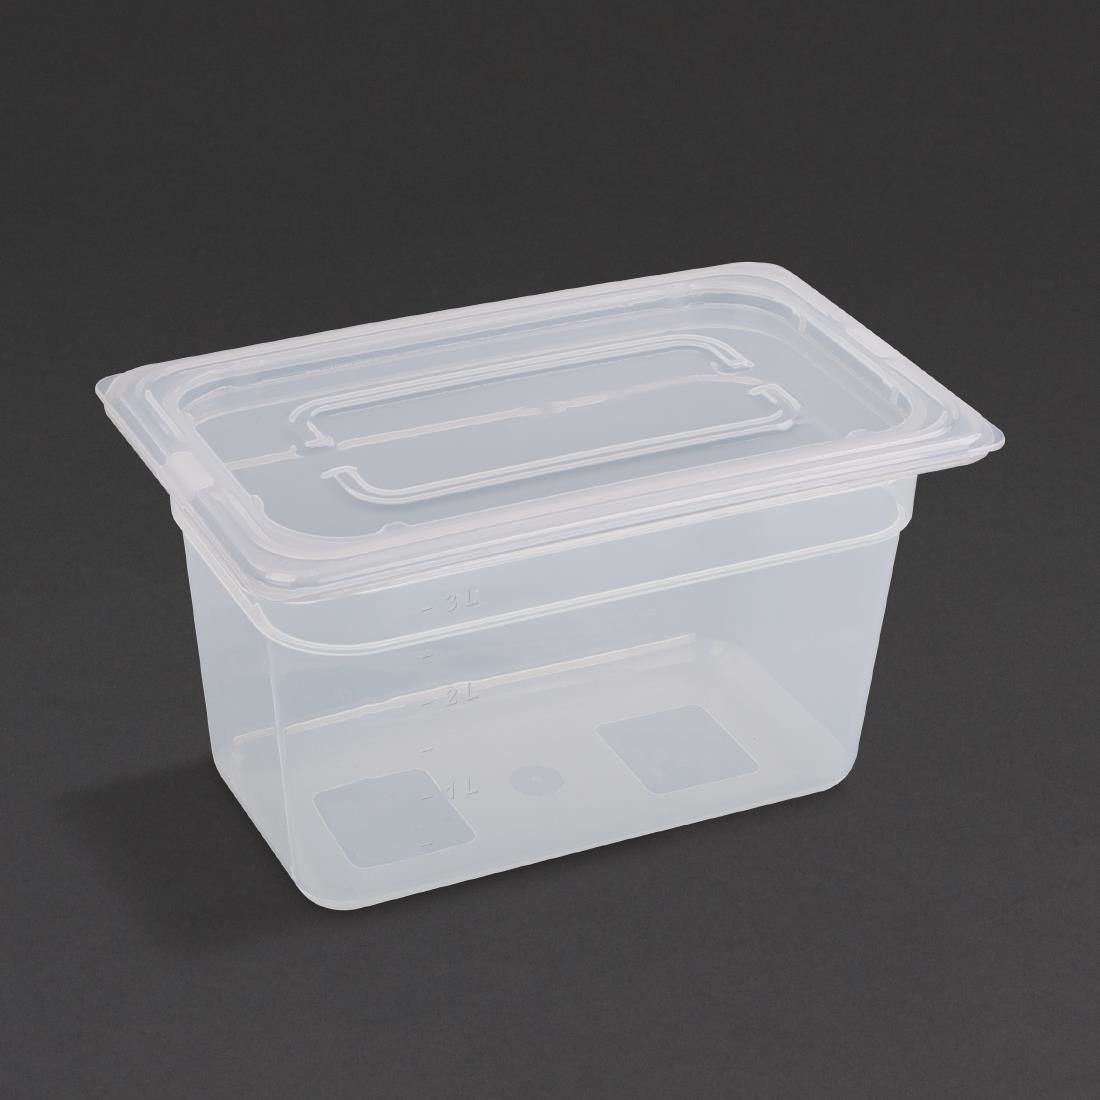 GJ524 Vogue Polypropylene 1/4 Gastronorm Container with Lid 150mm (Pack of 4) JD Catering Equipment Solutions Ltd